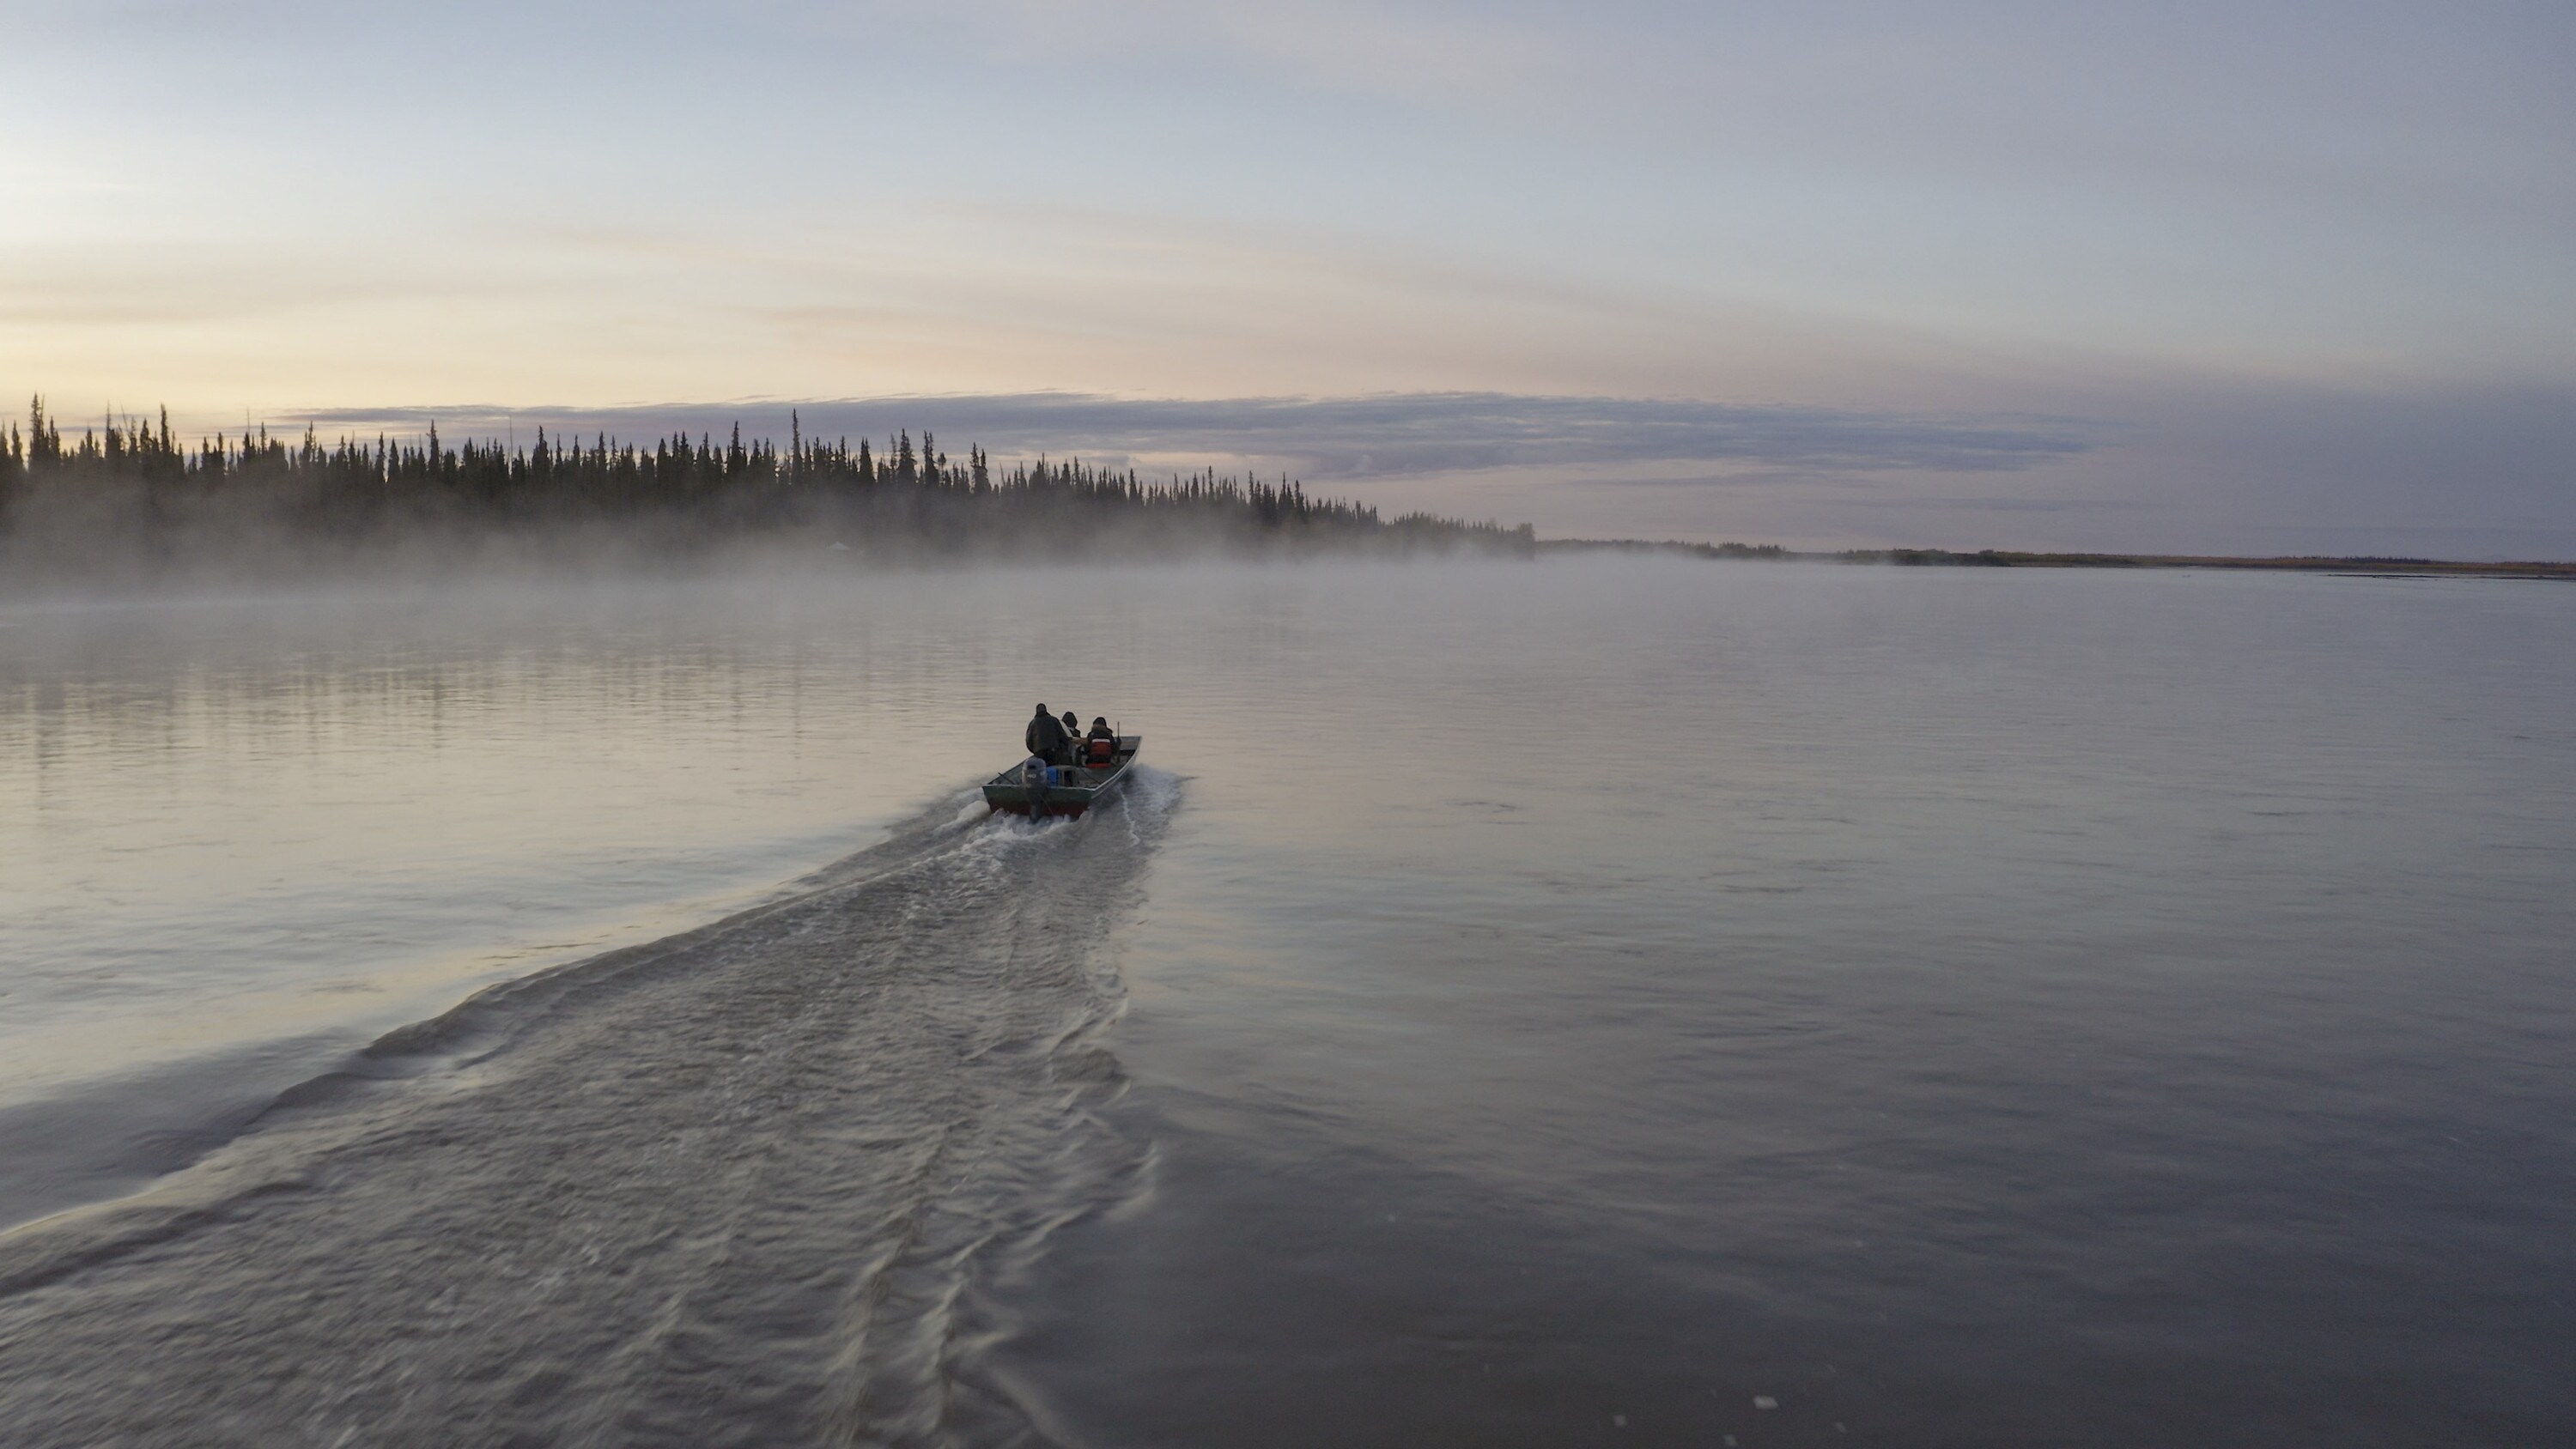 Bernadette Dementieff and her family ride up the Yukon River on their way to their ancestral hunting grounds. (National Geographic/Andrew Thompson)